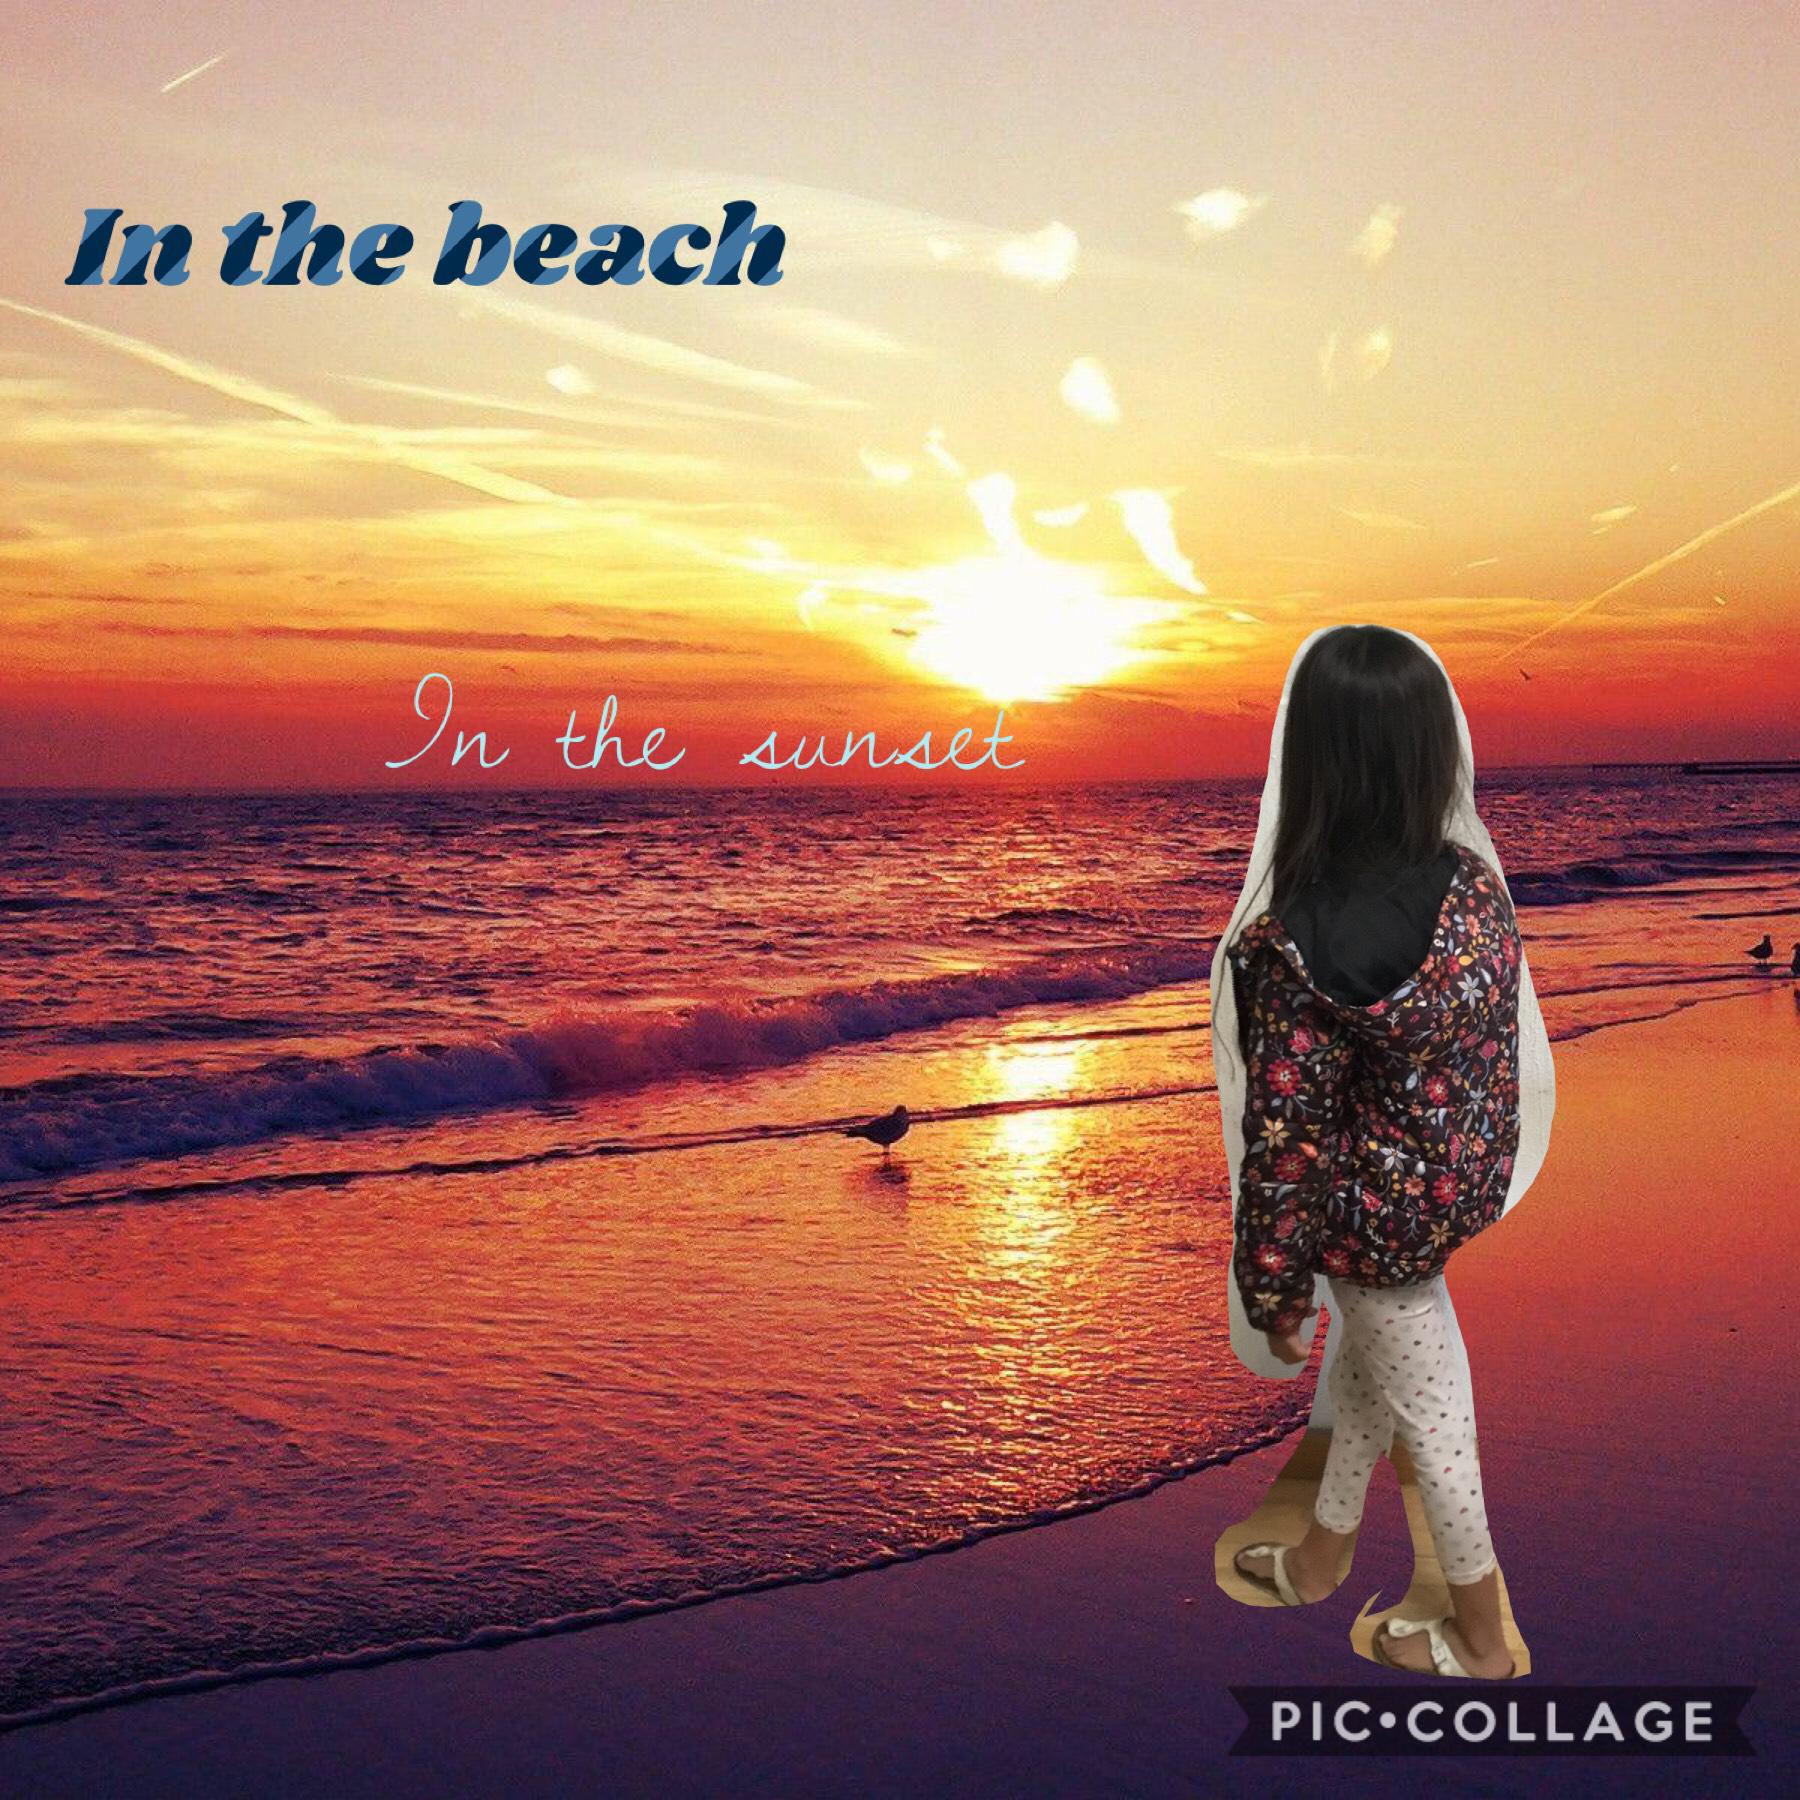 In the beach of the friend sunset